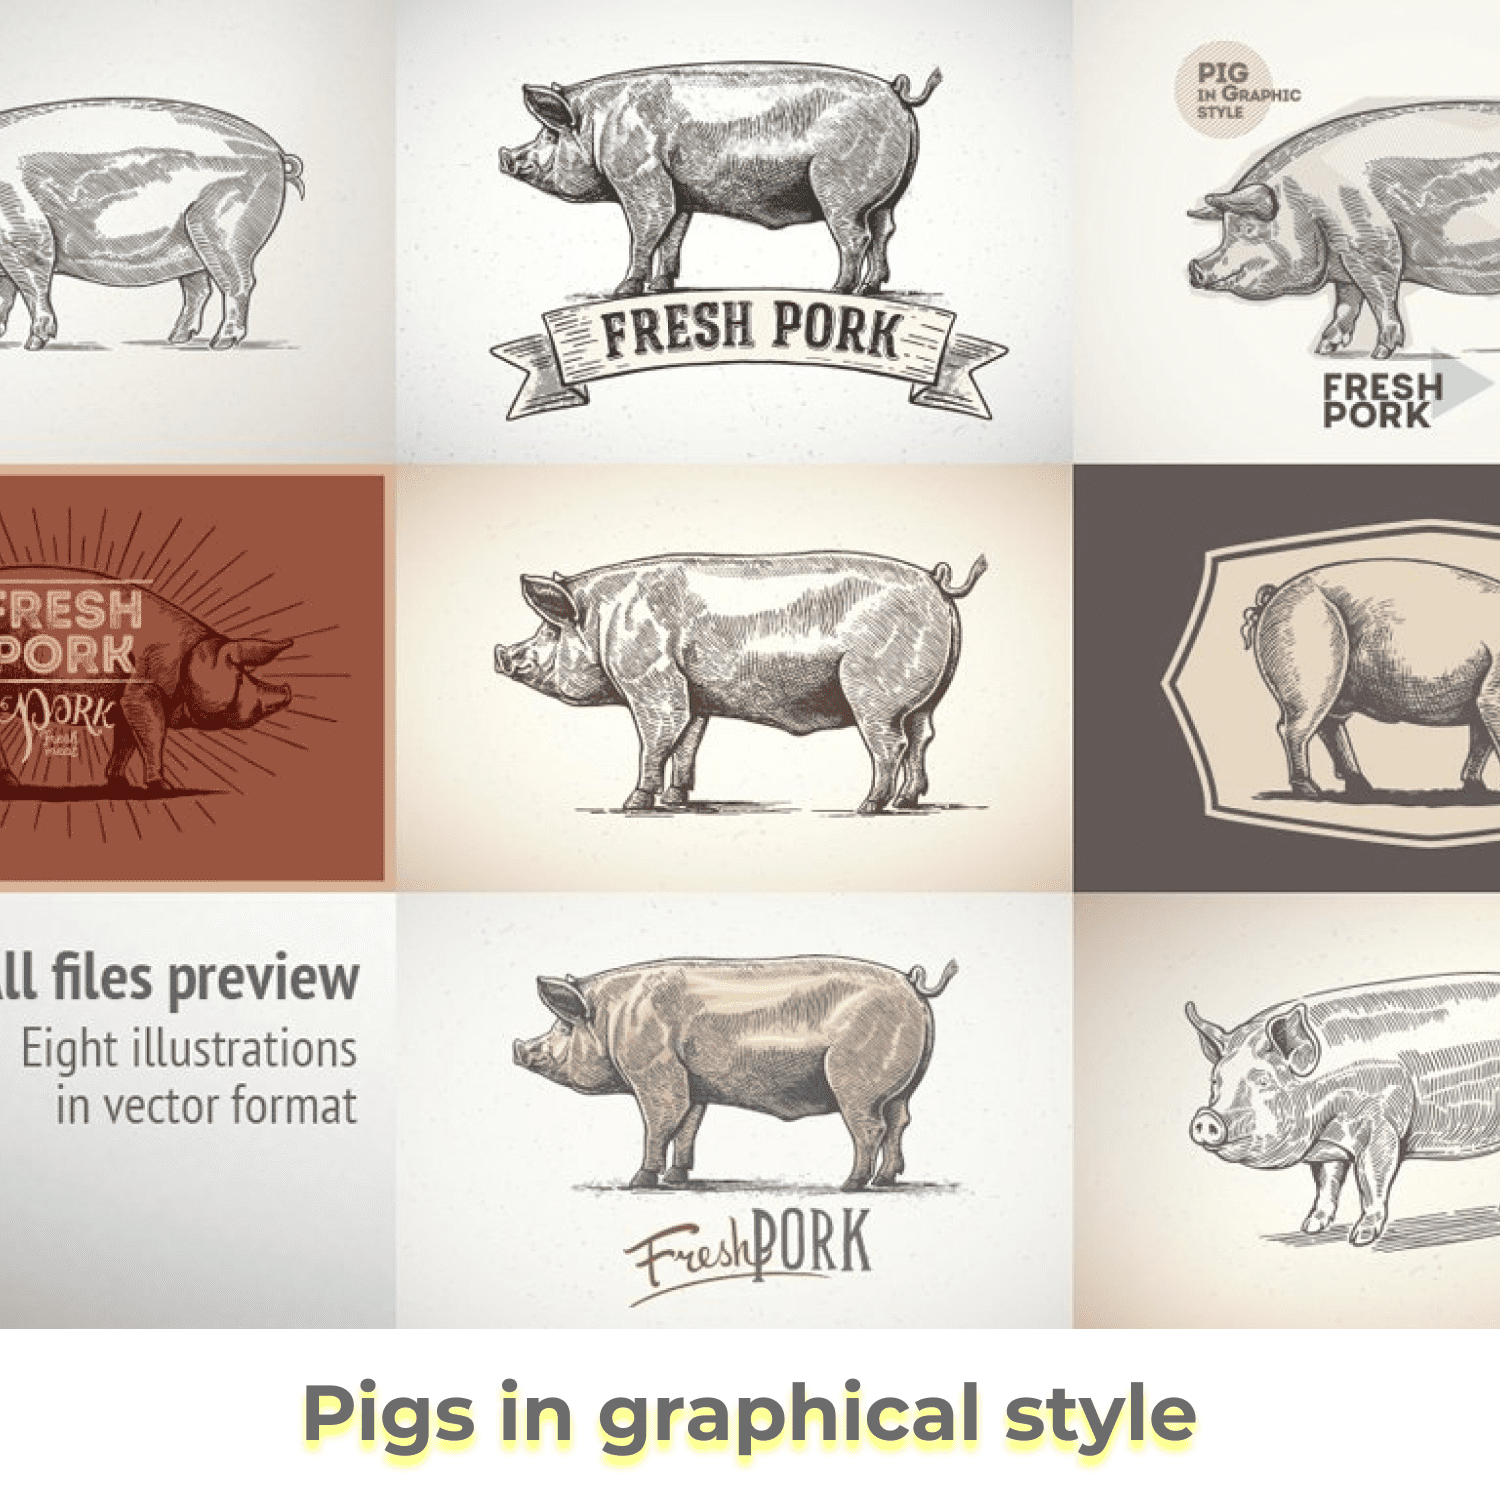 Pigs in graphical style cover.